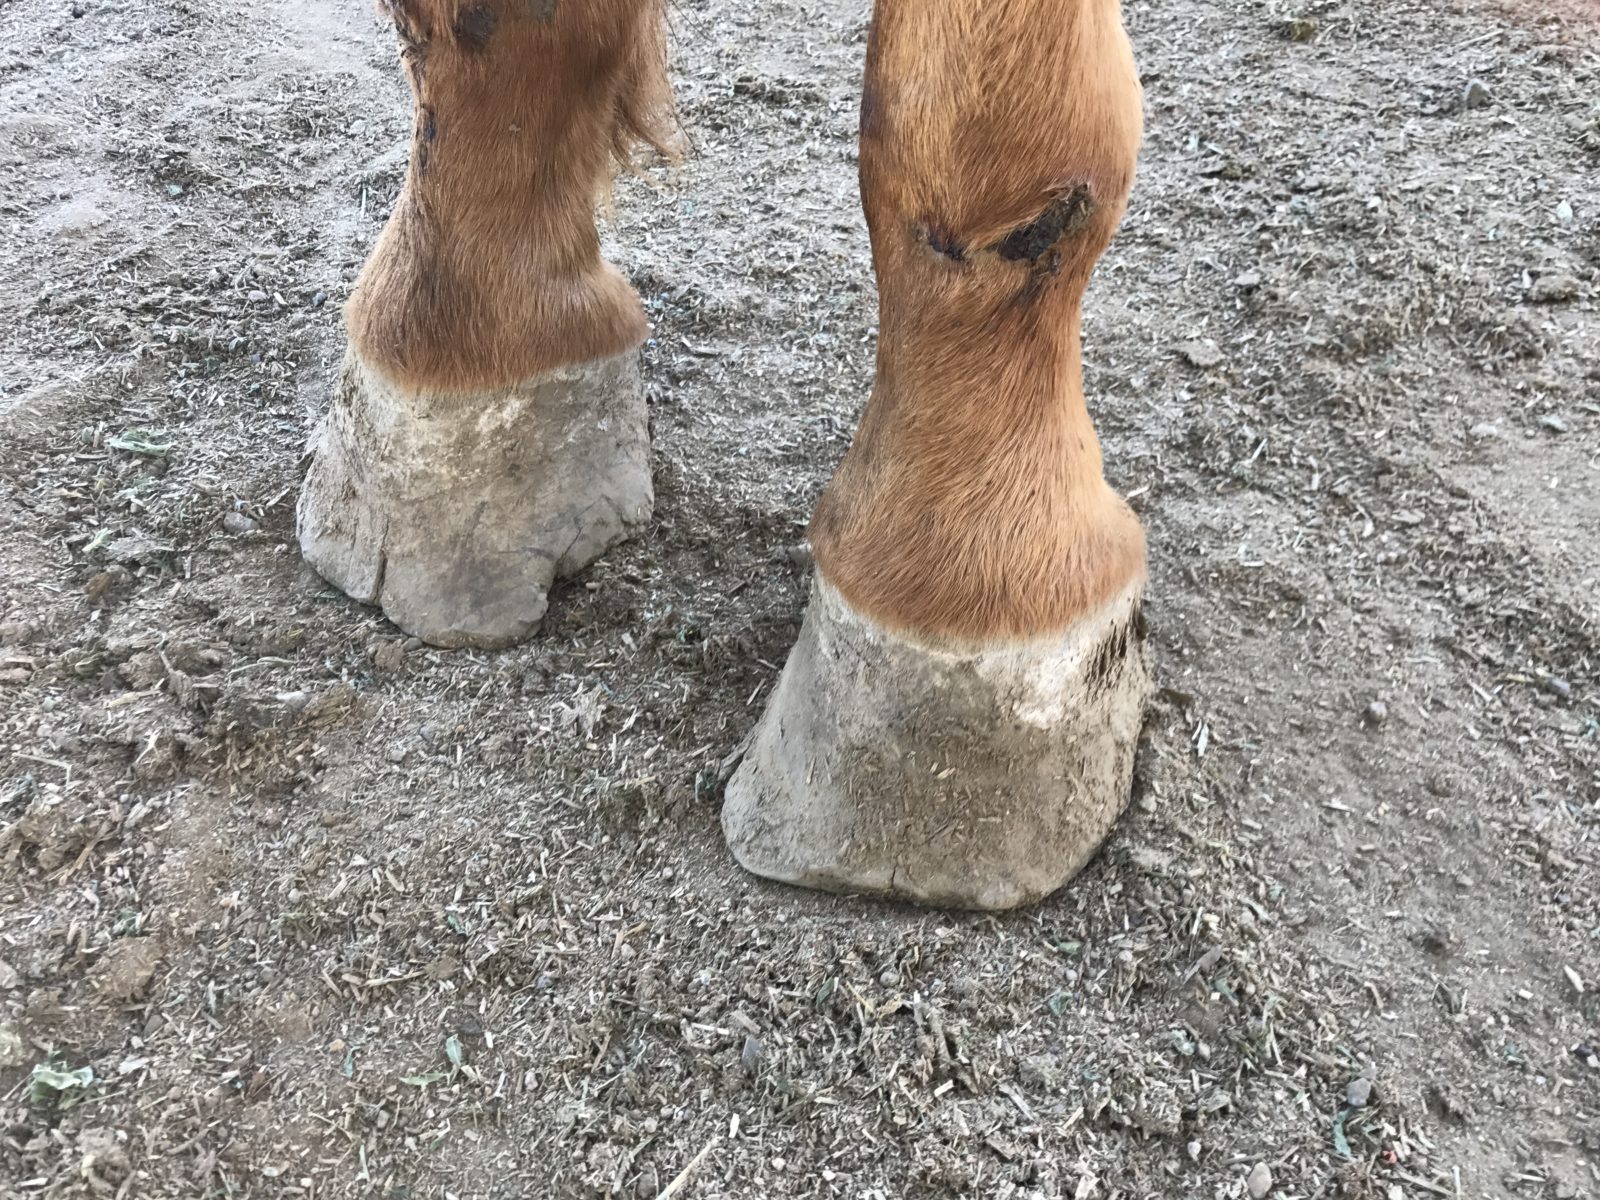 Harley front feet- before being trimmed. You can see the crack in front- it goes though to the interior hoof wall, allowing fungus and bacteria to seep in and eat away at the hoof.